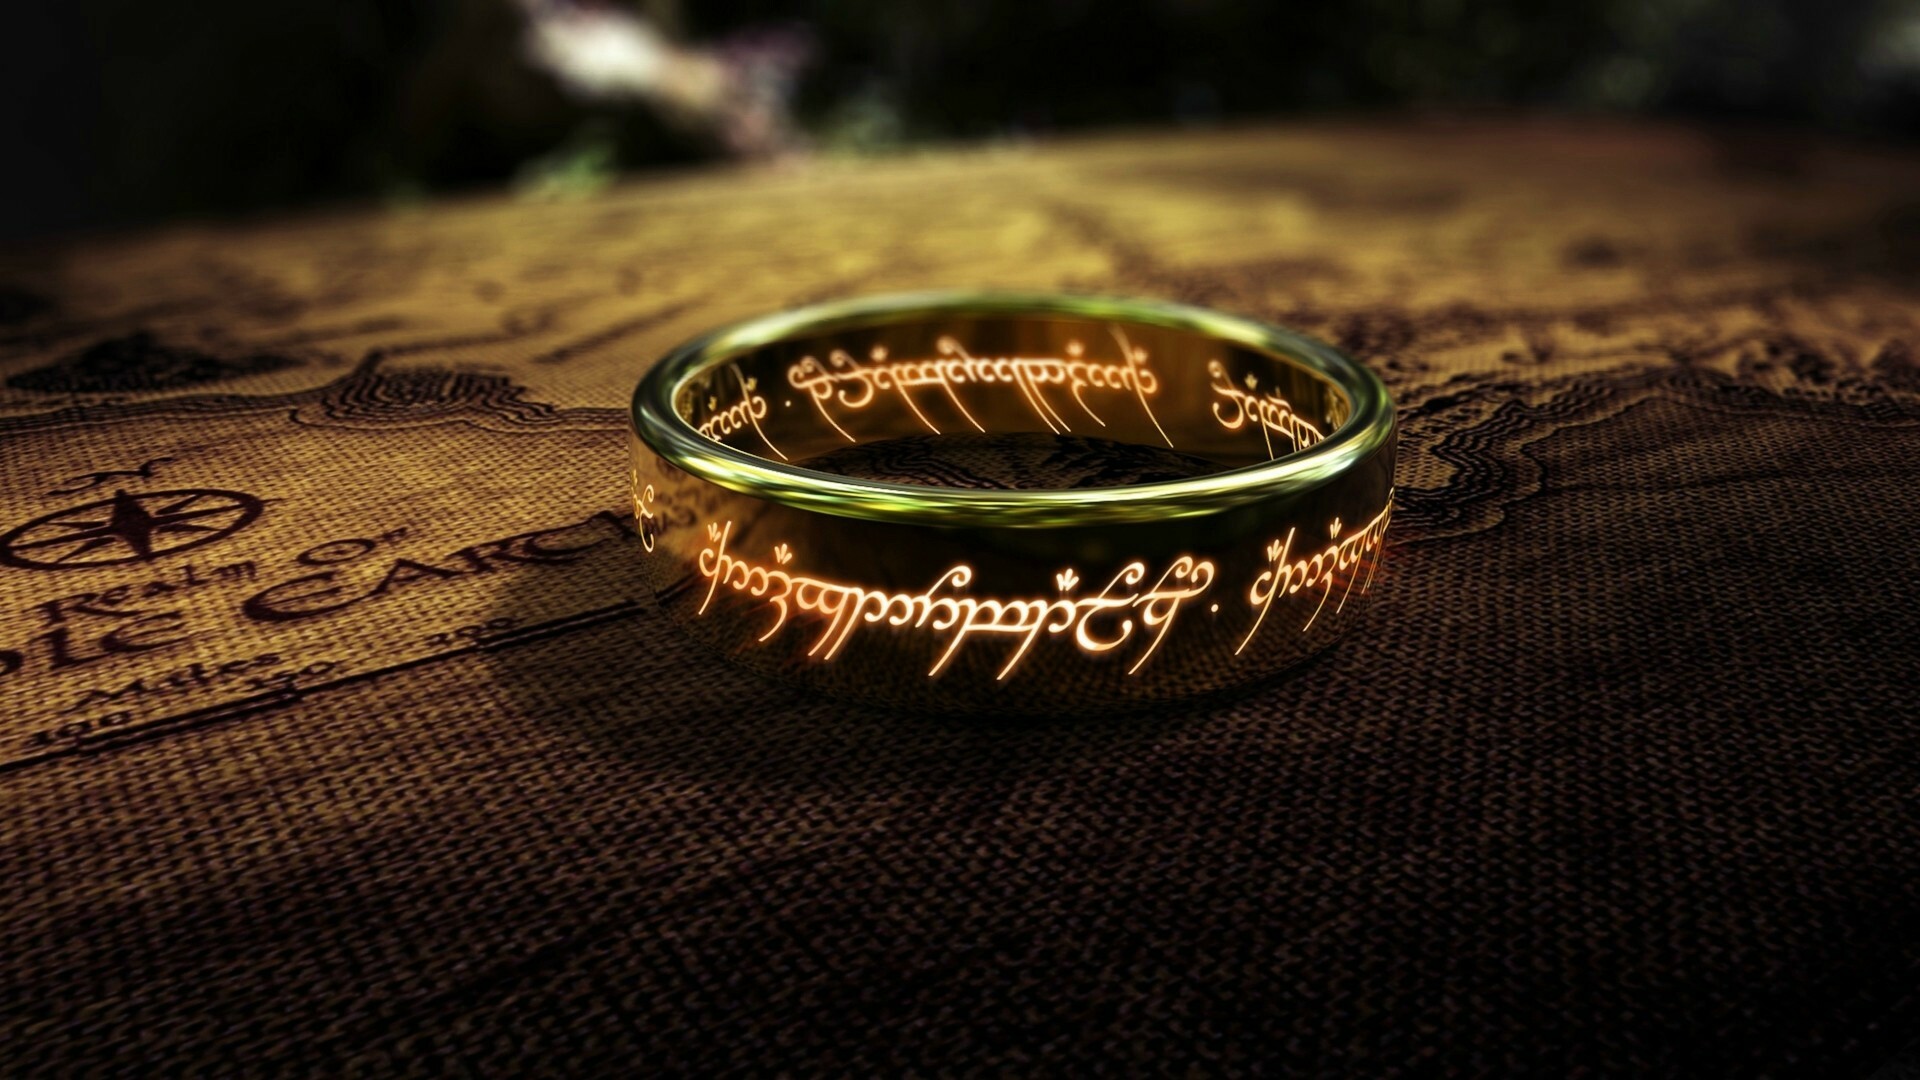 The Lord of the Rings: The One Ring, An ancient artifact created by the Dark Lord Sauron in the Second Age. 1920x1080 Full HD Wallpaper.